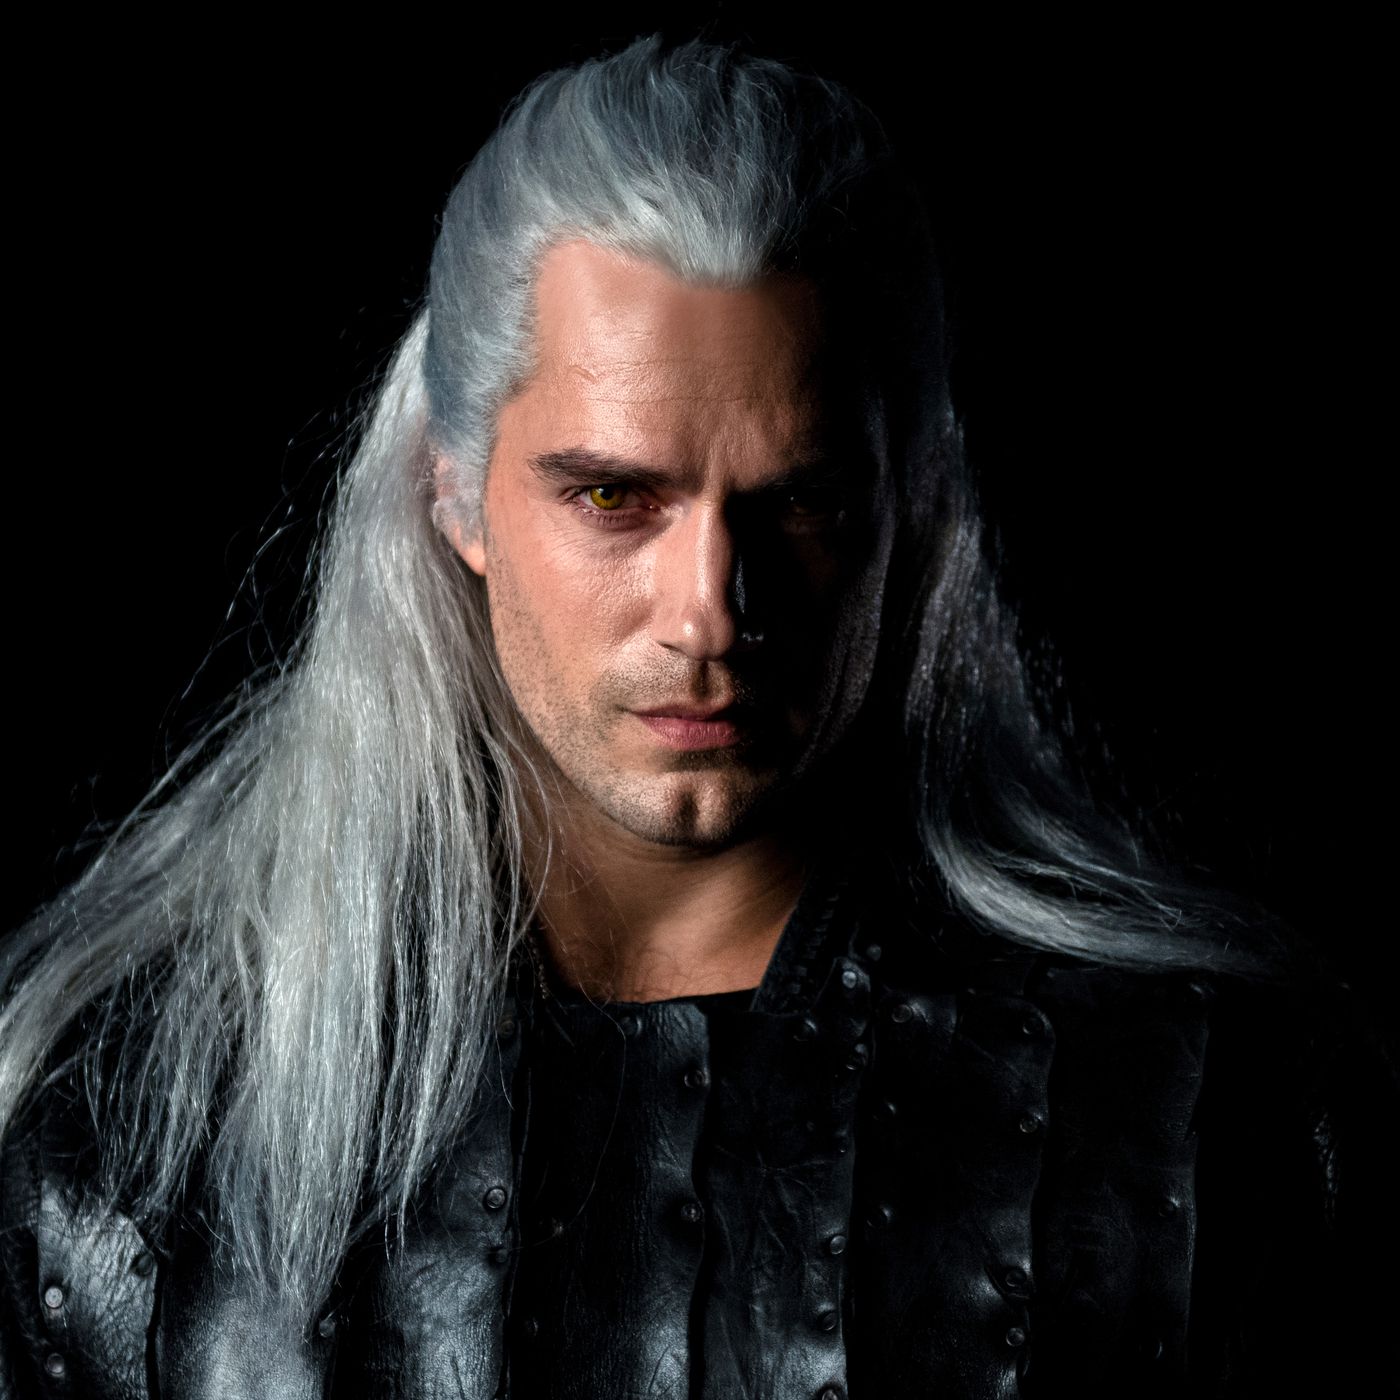 Henry Cavill as Geralt of Rivia with silver hair and color almond eyes